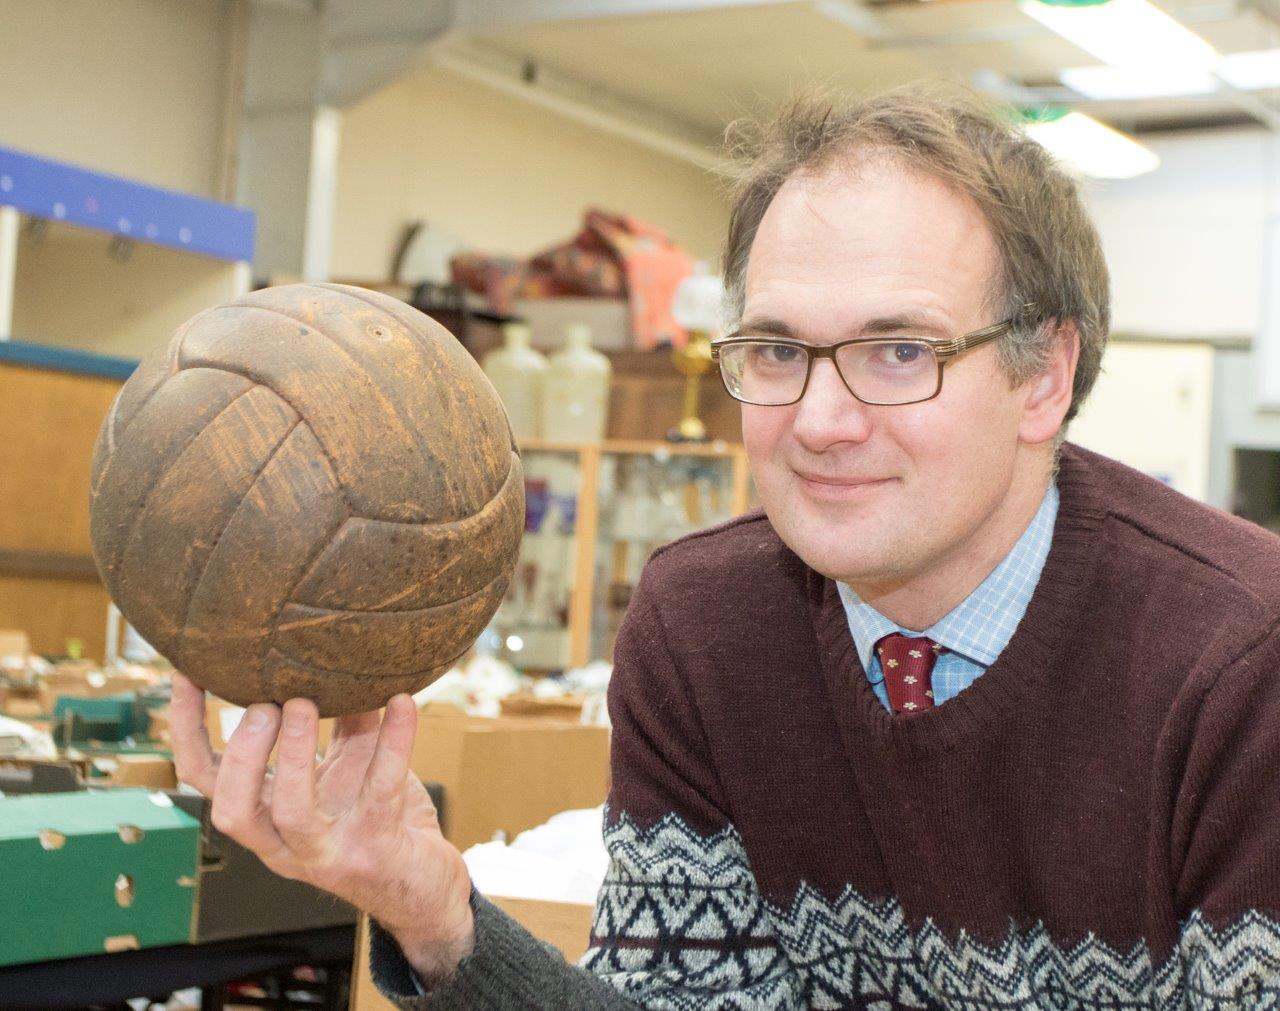 Charles Hanson with the football